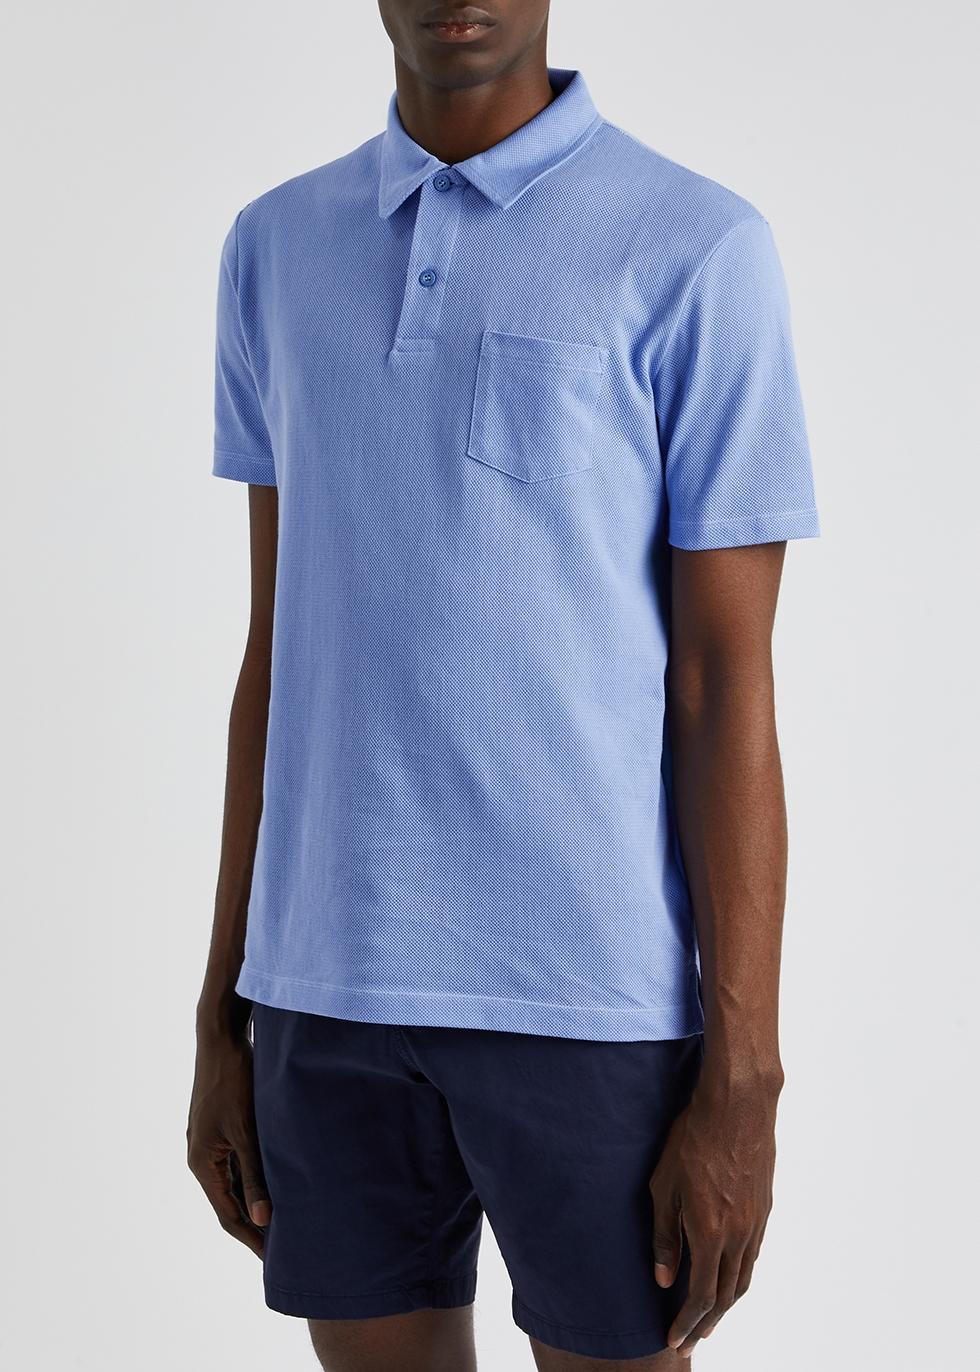 Sunspel Riviera Cotton-mesh Polo Shirt in Blue for Men | Lyst